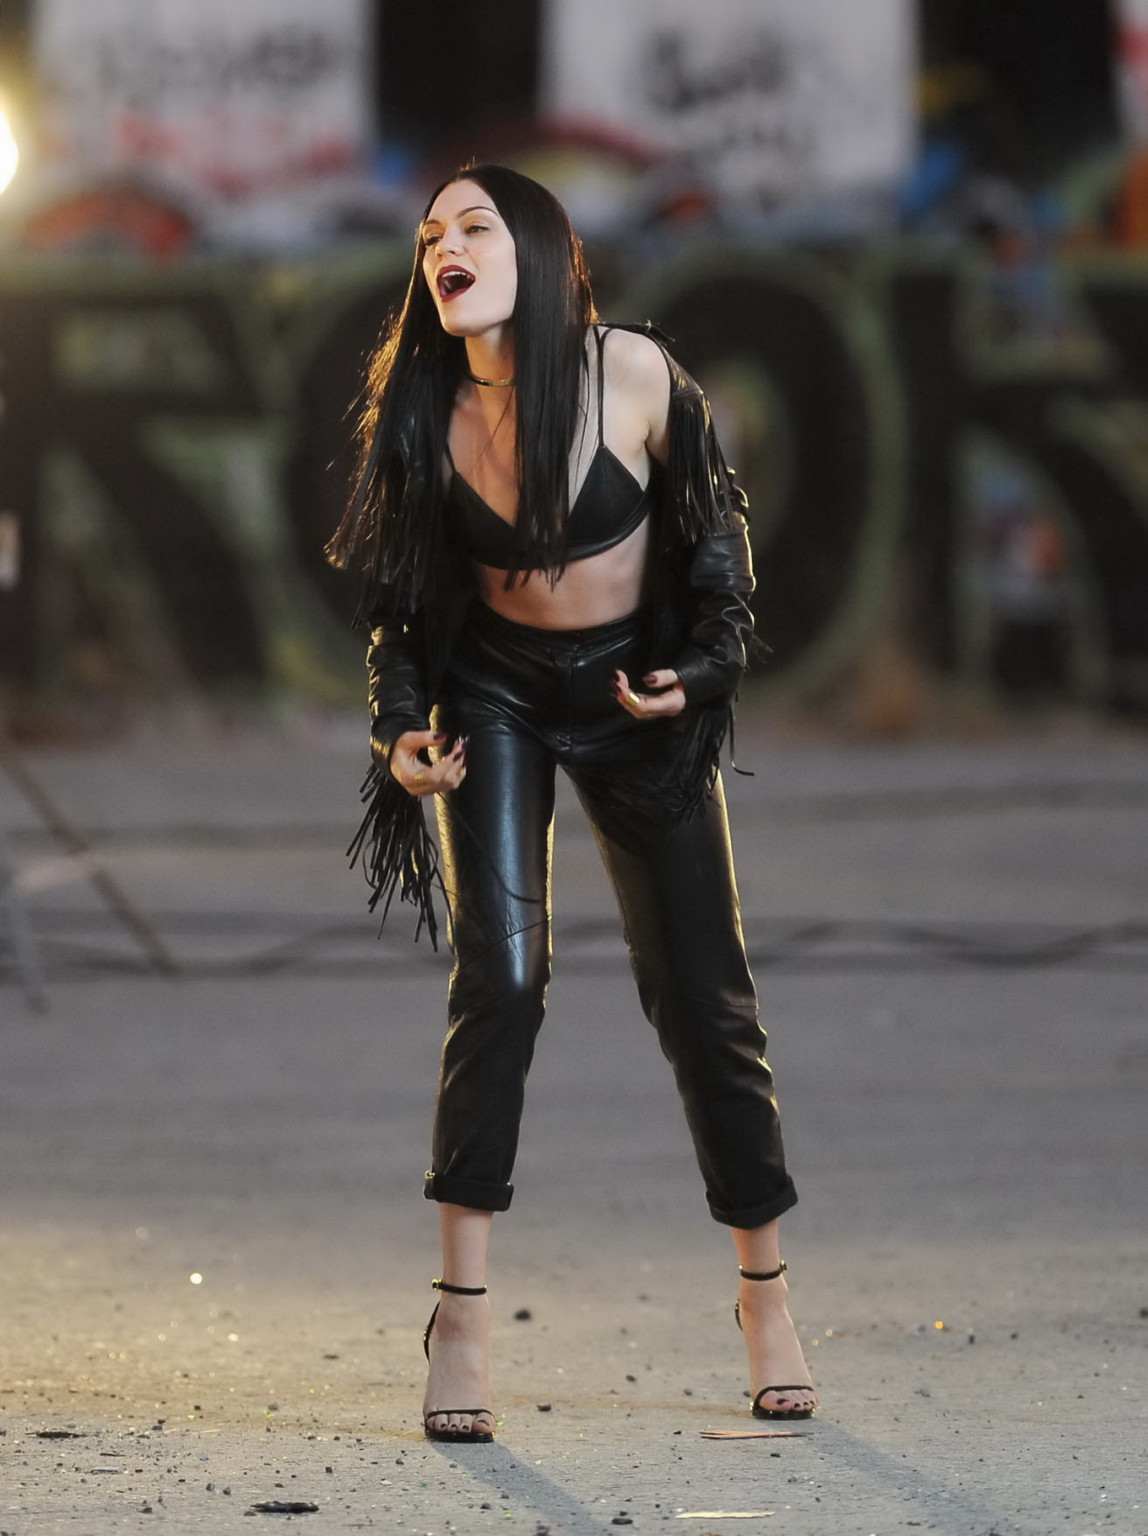 Jessie J showing boobs in tiny black leather bra on the set of her new music vid #75180821